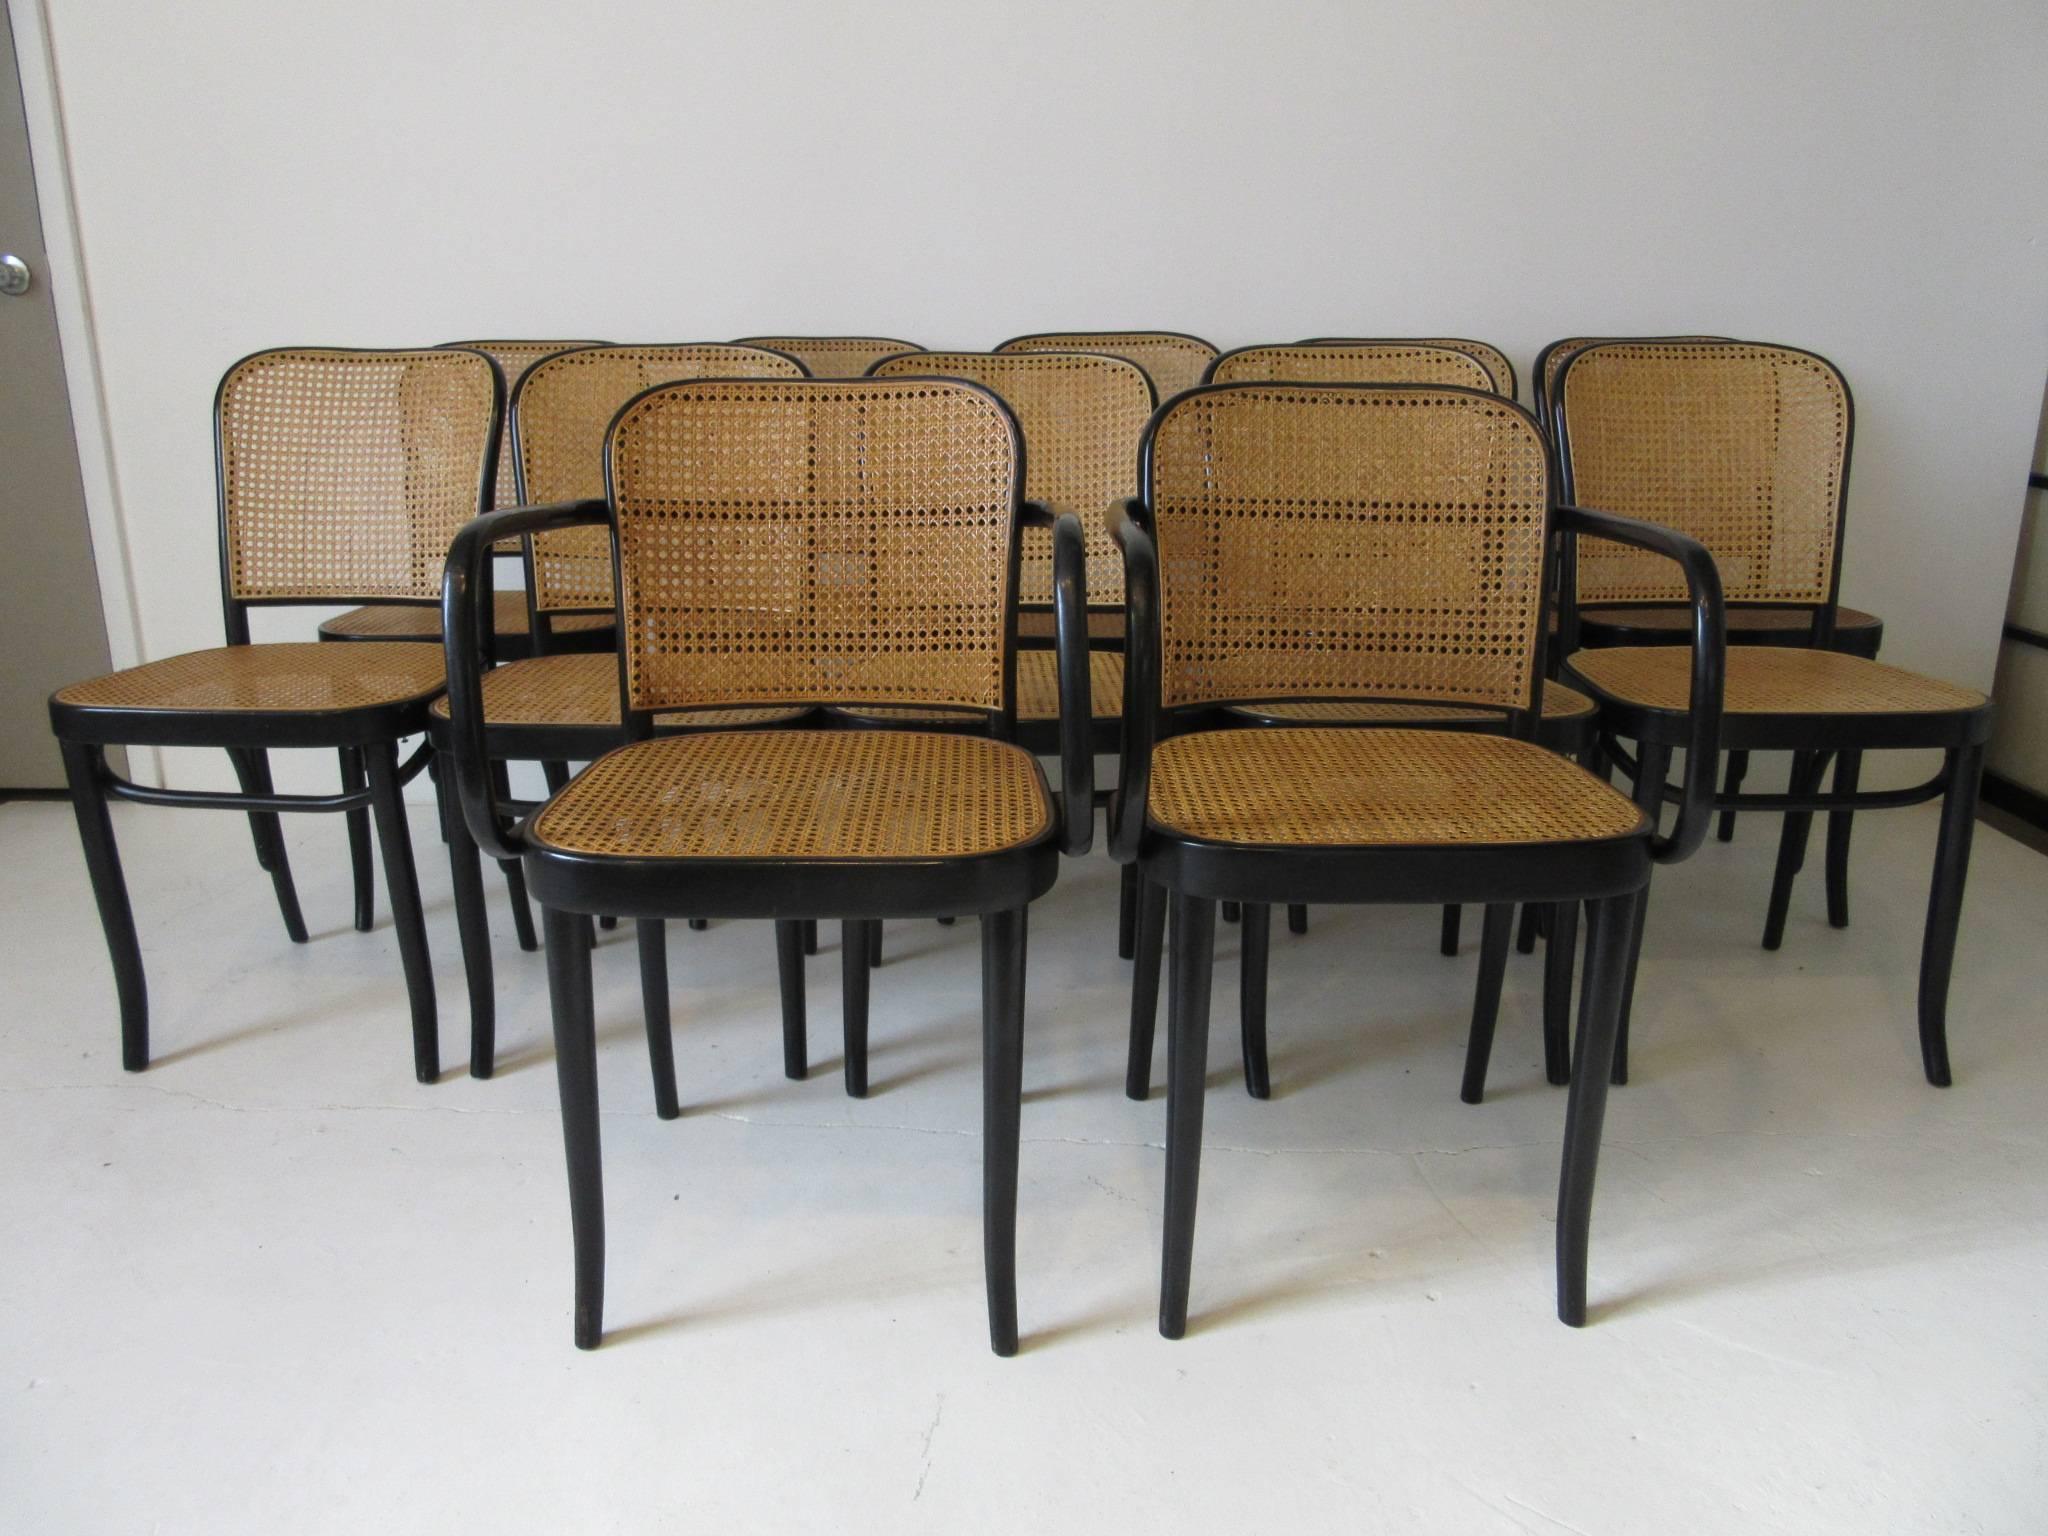 A set of 12 Prague bent wood and caned dining chairs designed by Josef Hoffmann with satin black frames marked to the bottoms by the manufacture Thonet. The set contains two armchairs 31.5" H x 20.67" W x 17.72" D and 10 side chairs